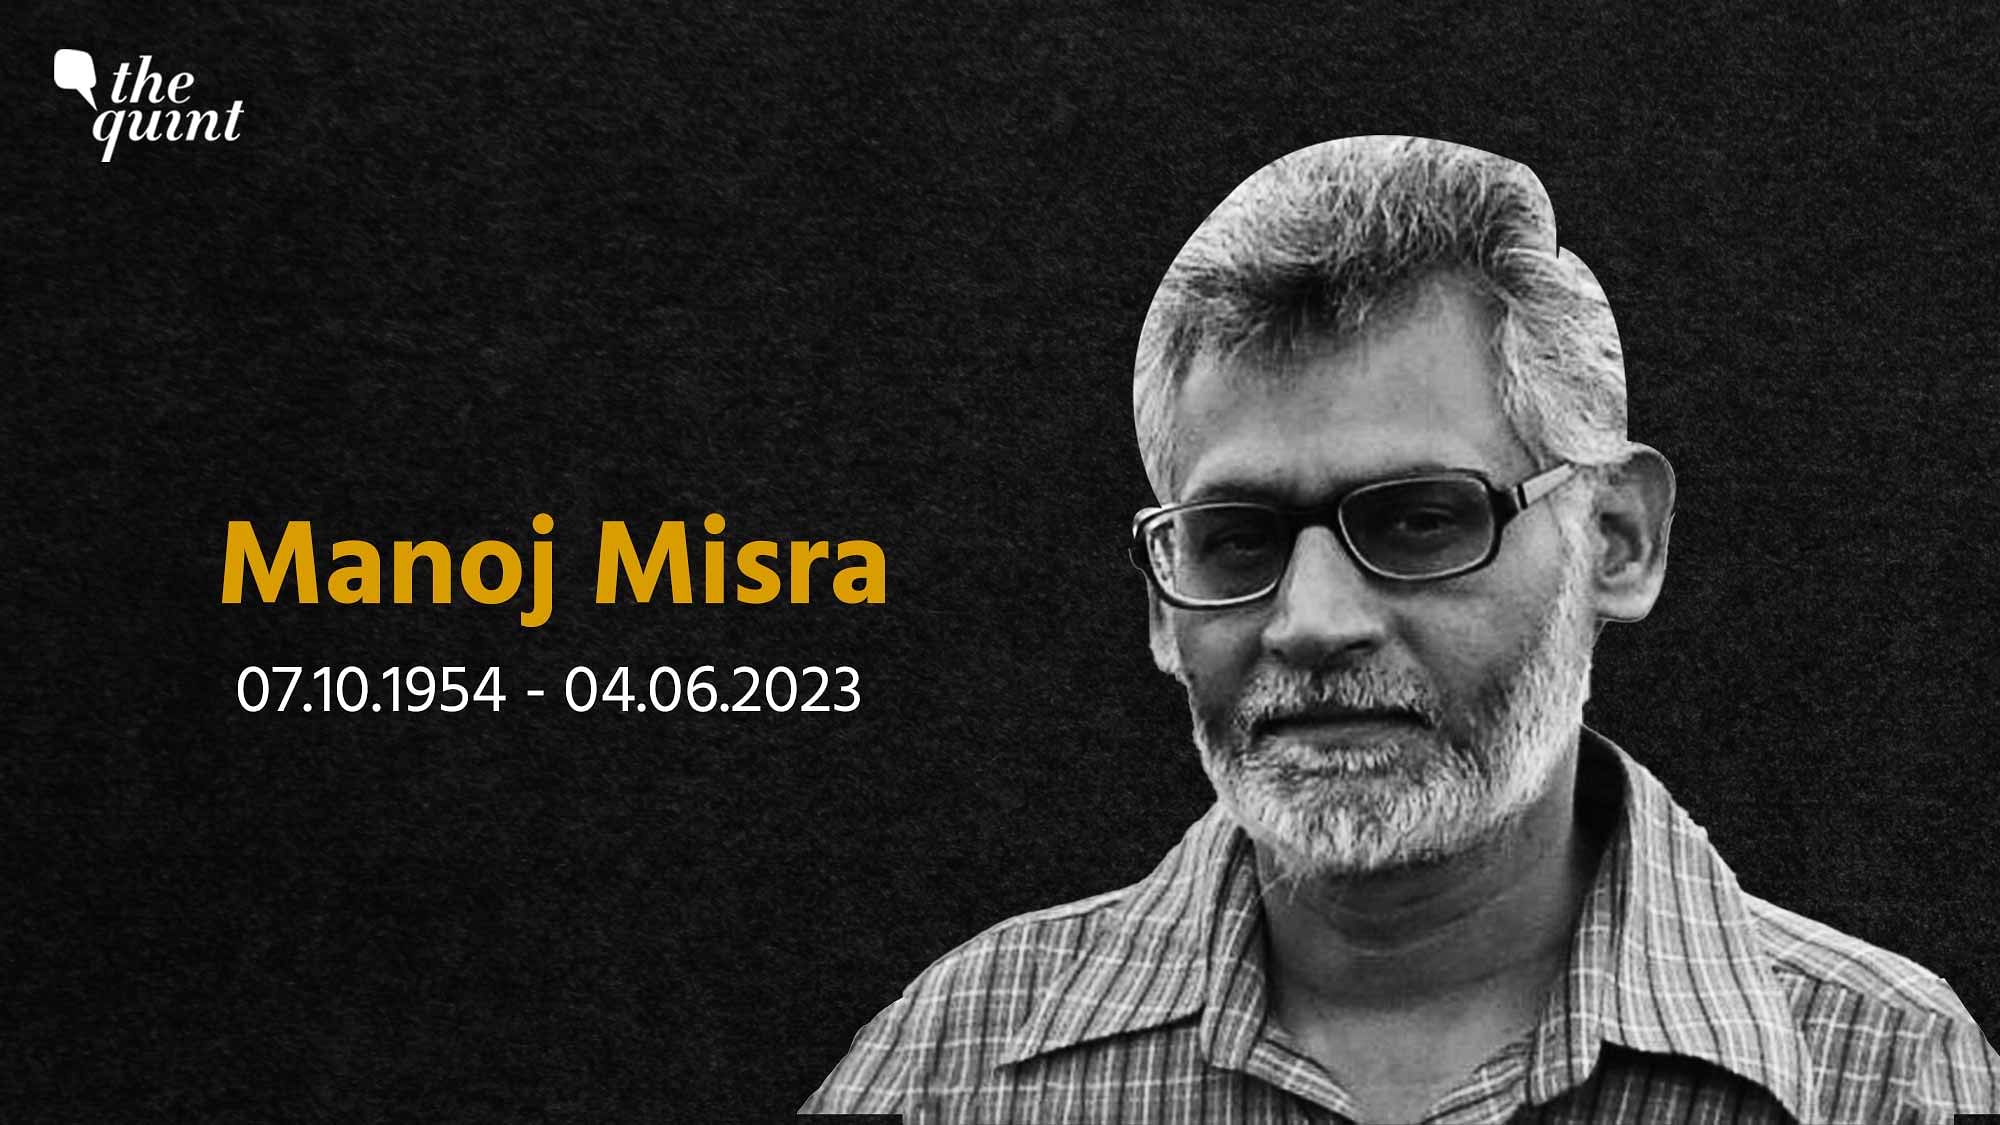 <div class="paragraphs"><p>Manoj Misra, one of the Yamuna’s most dedicated sons left us on 4 June, leaving behind a unique riverine conservation legacy without an heir apparent.</p></div>